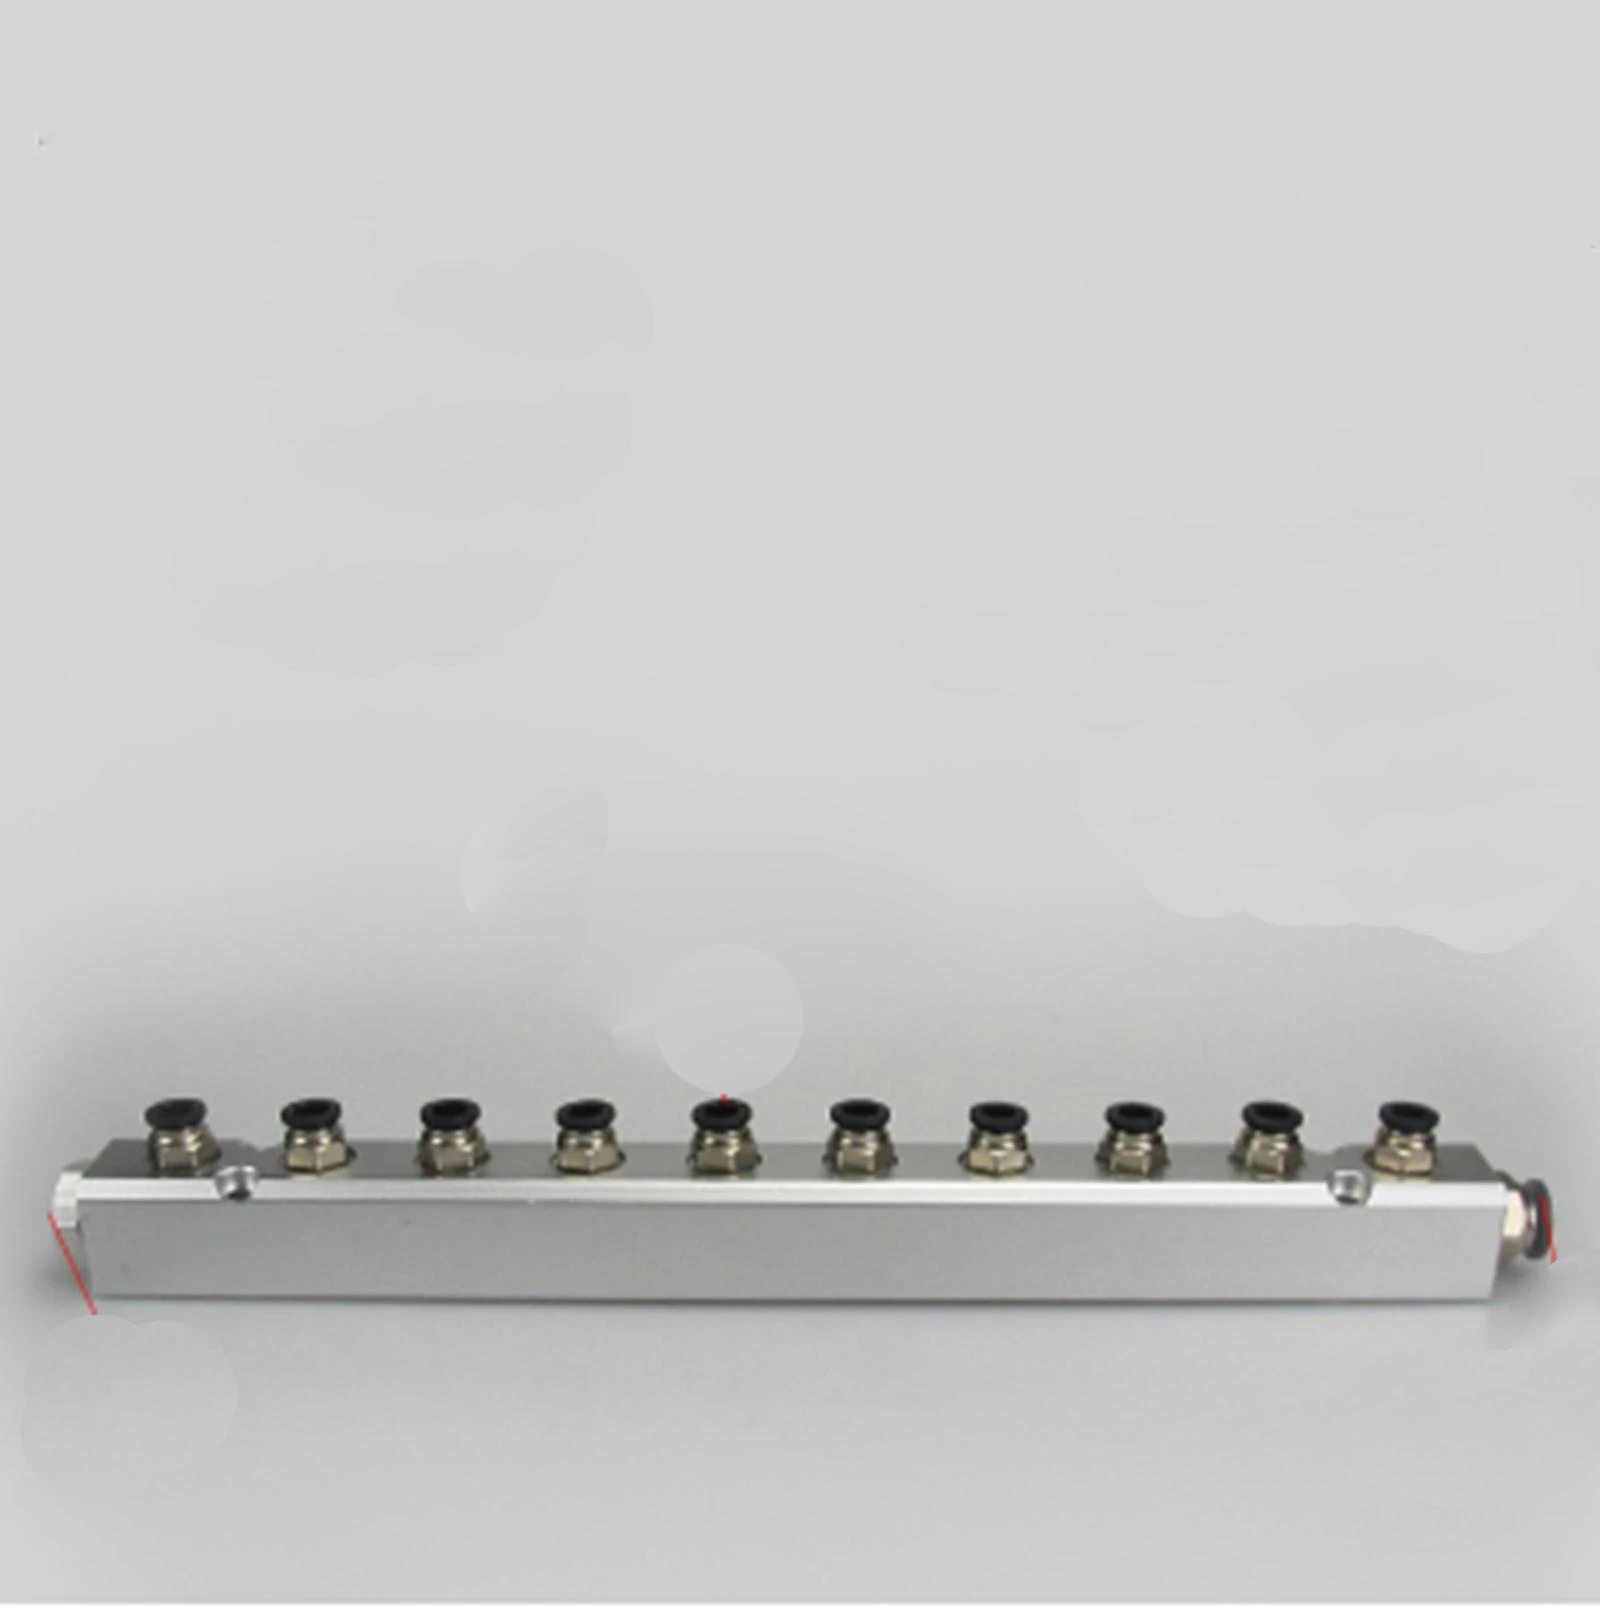 30x30mm G1/4" Out G1/2" In 3-10 Way Pneumatic Fitting Manifold Block Splitter